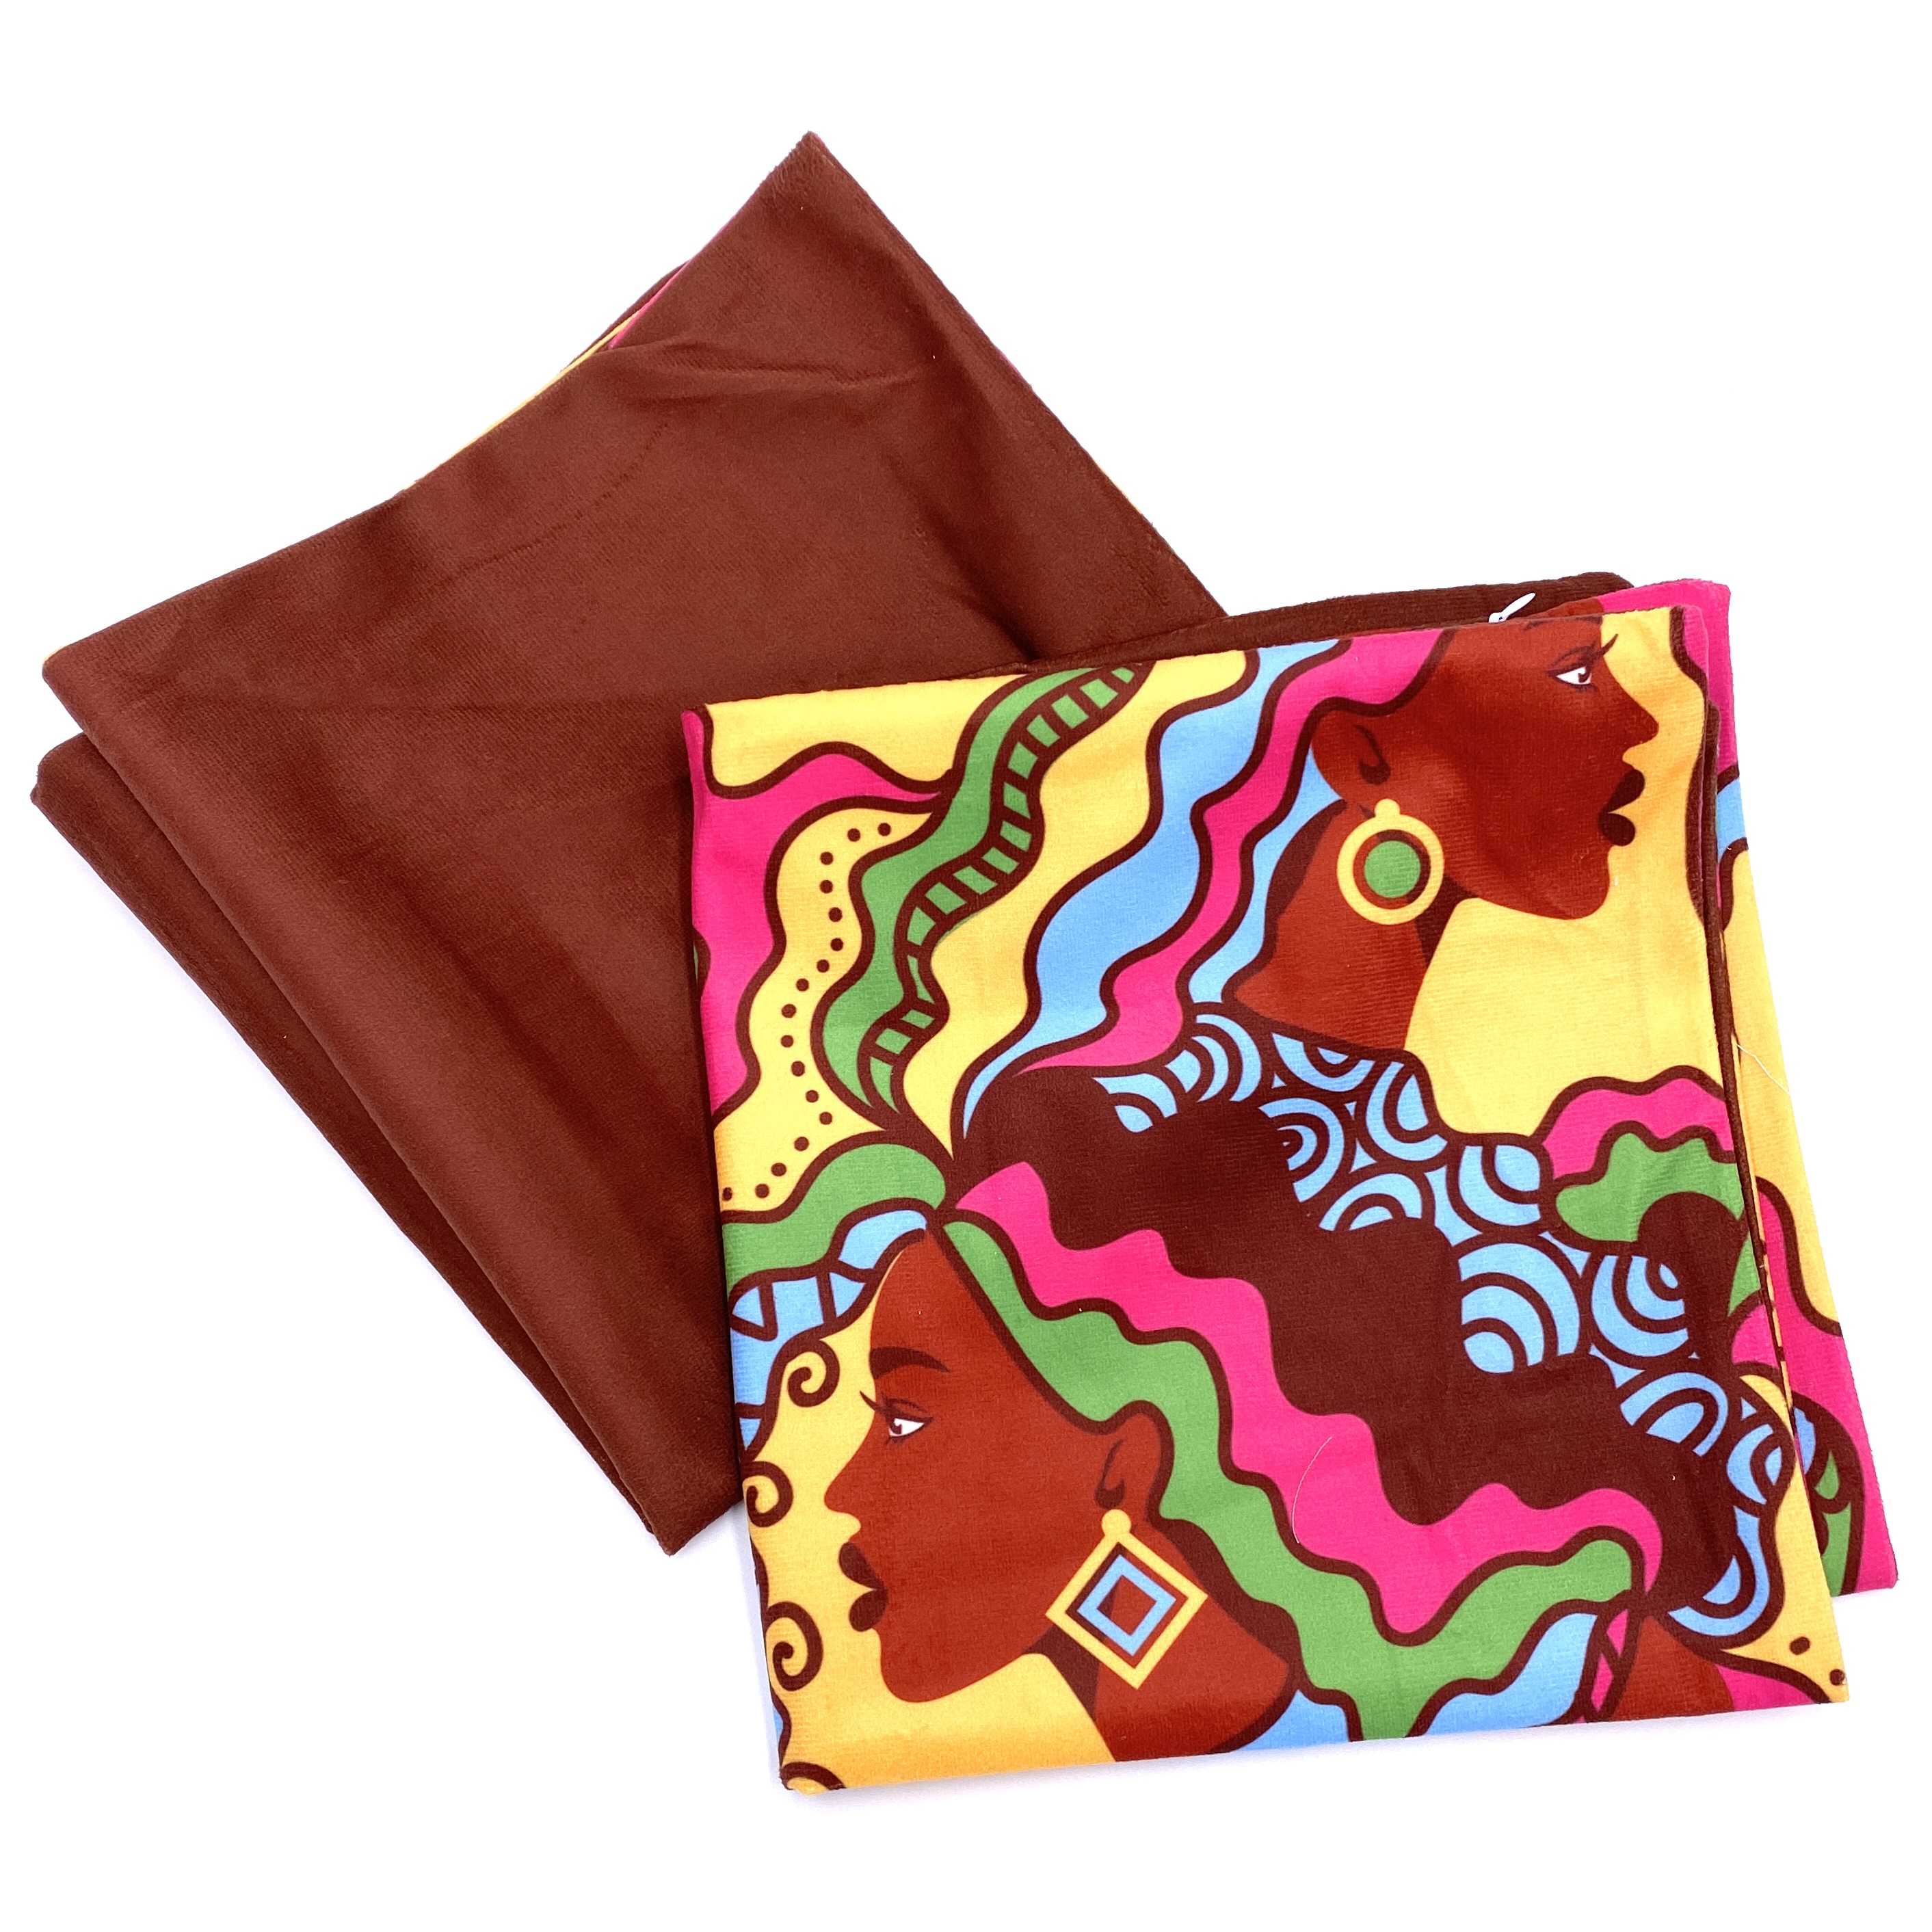 Throw Pillow Cover for Brown Sugar Box October 2020